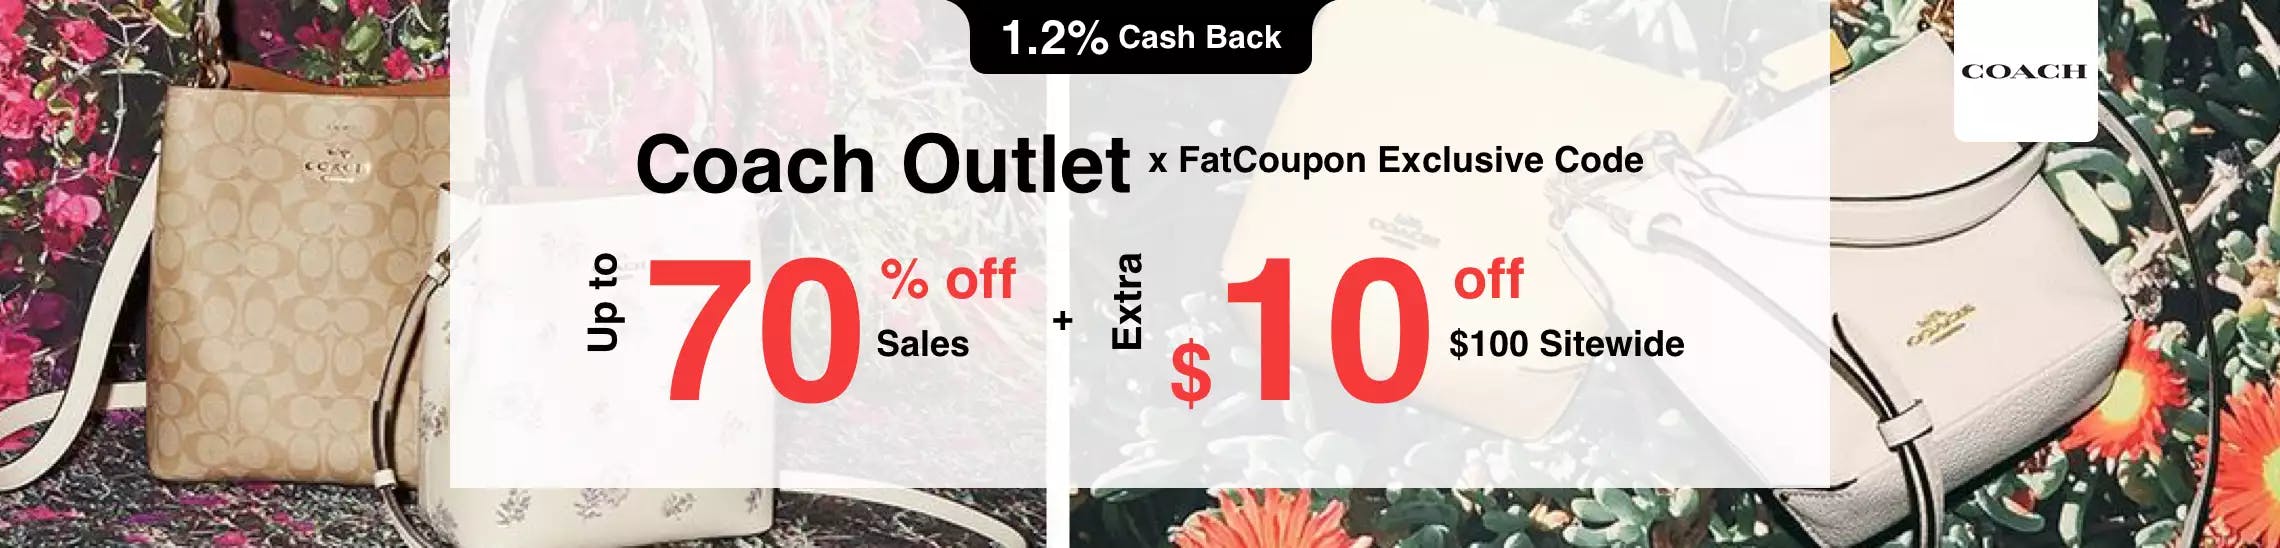 COACH Outlet Promo Codes and Cash Back